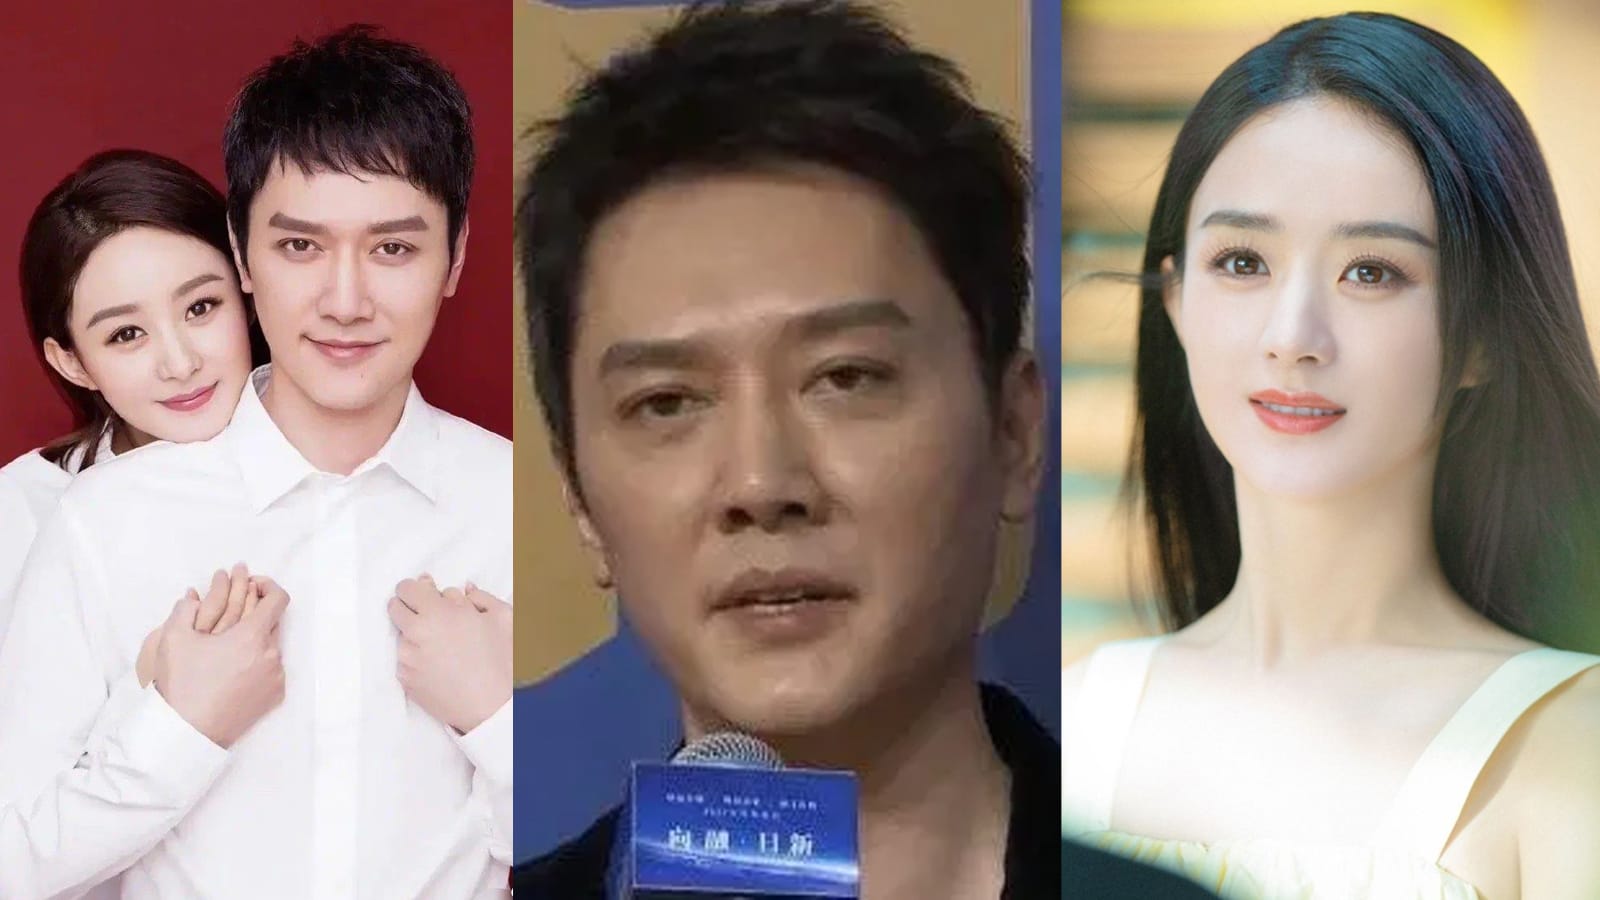 Netizens Think Feng Shaofeng Looks “Haggard” While Ex-Wife Zhao Liying Is “Glowing” Post-Divorce